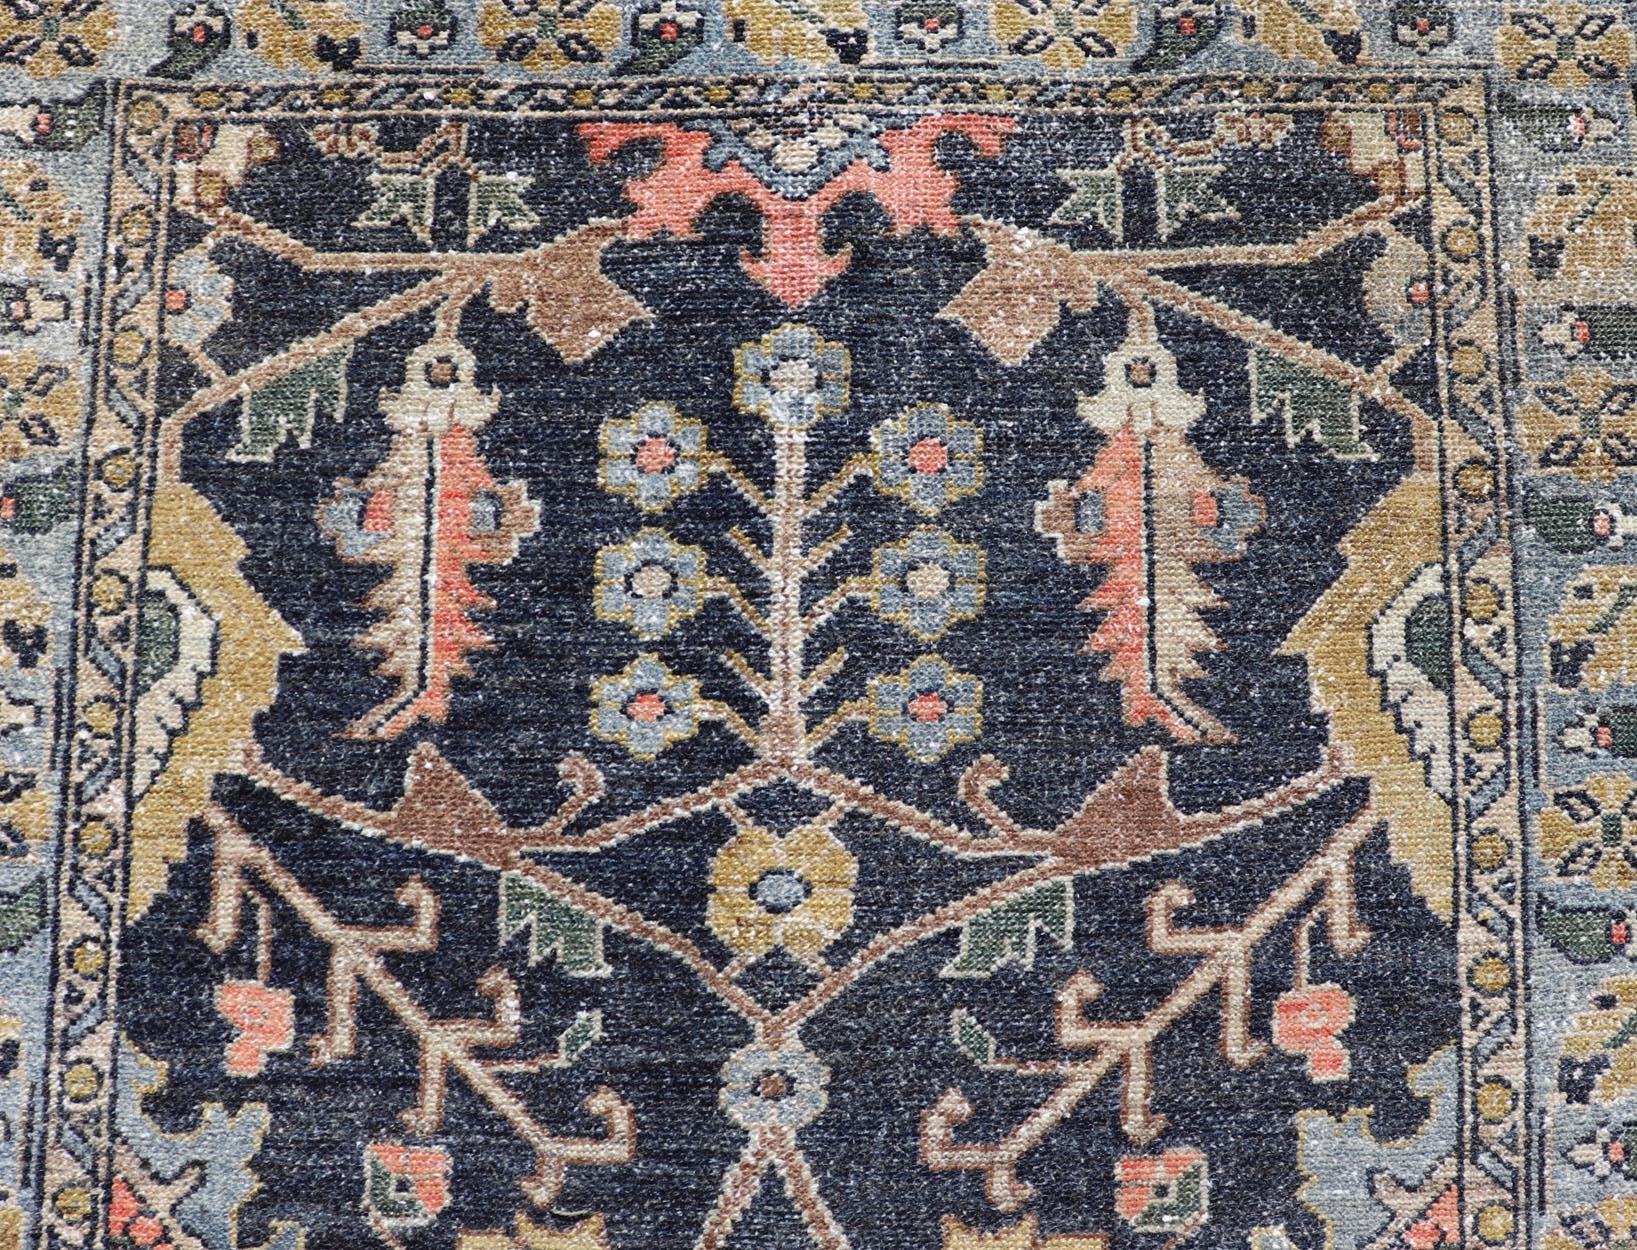 Antique Persian Malayer Tribal Runner in Steal Gray Blue, Green, Gold, and Coral. Keivan Woven Arts: rug W22-0106, Country of Origin: Iran; Type: Malayer; Design: All-Over, Floral Paisley; .
Measures: 3'4 x 16'0 
This antique Persian Malayer